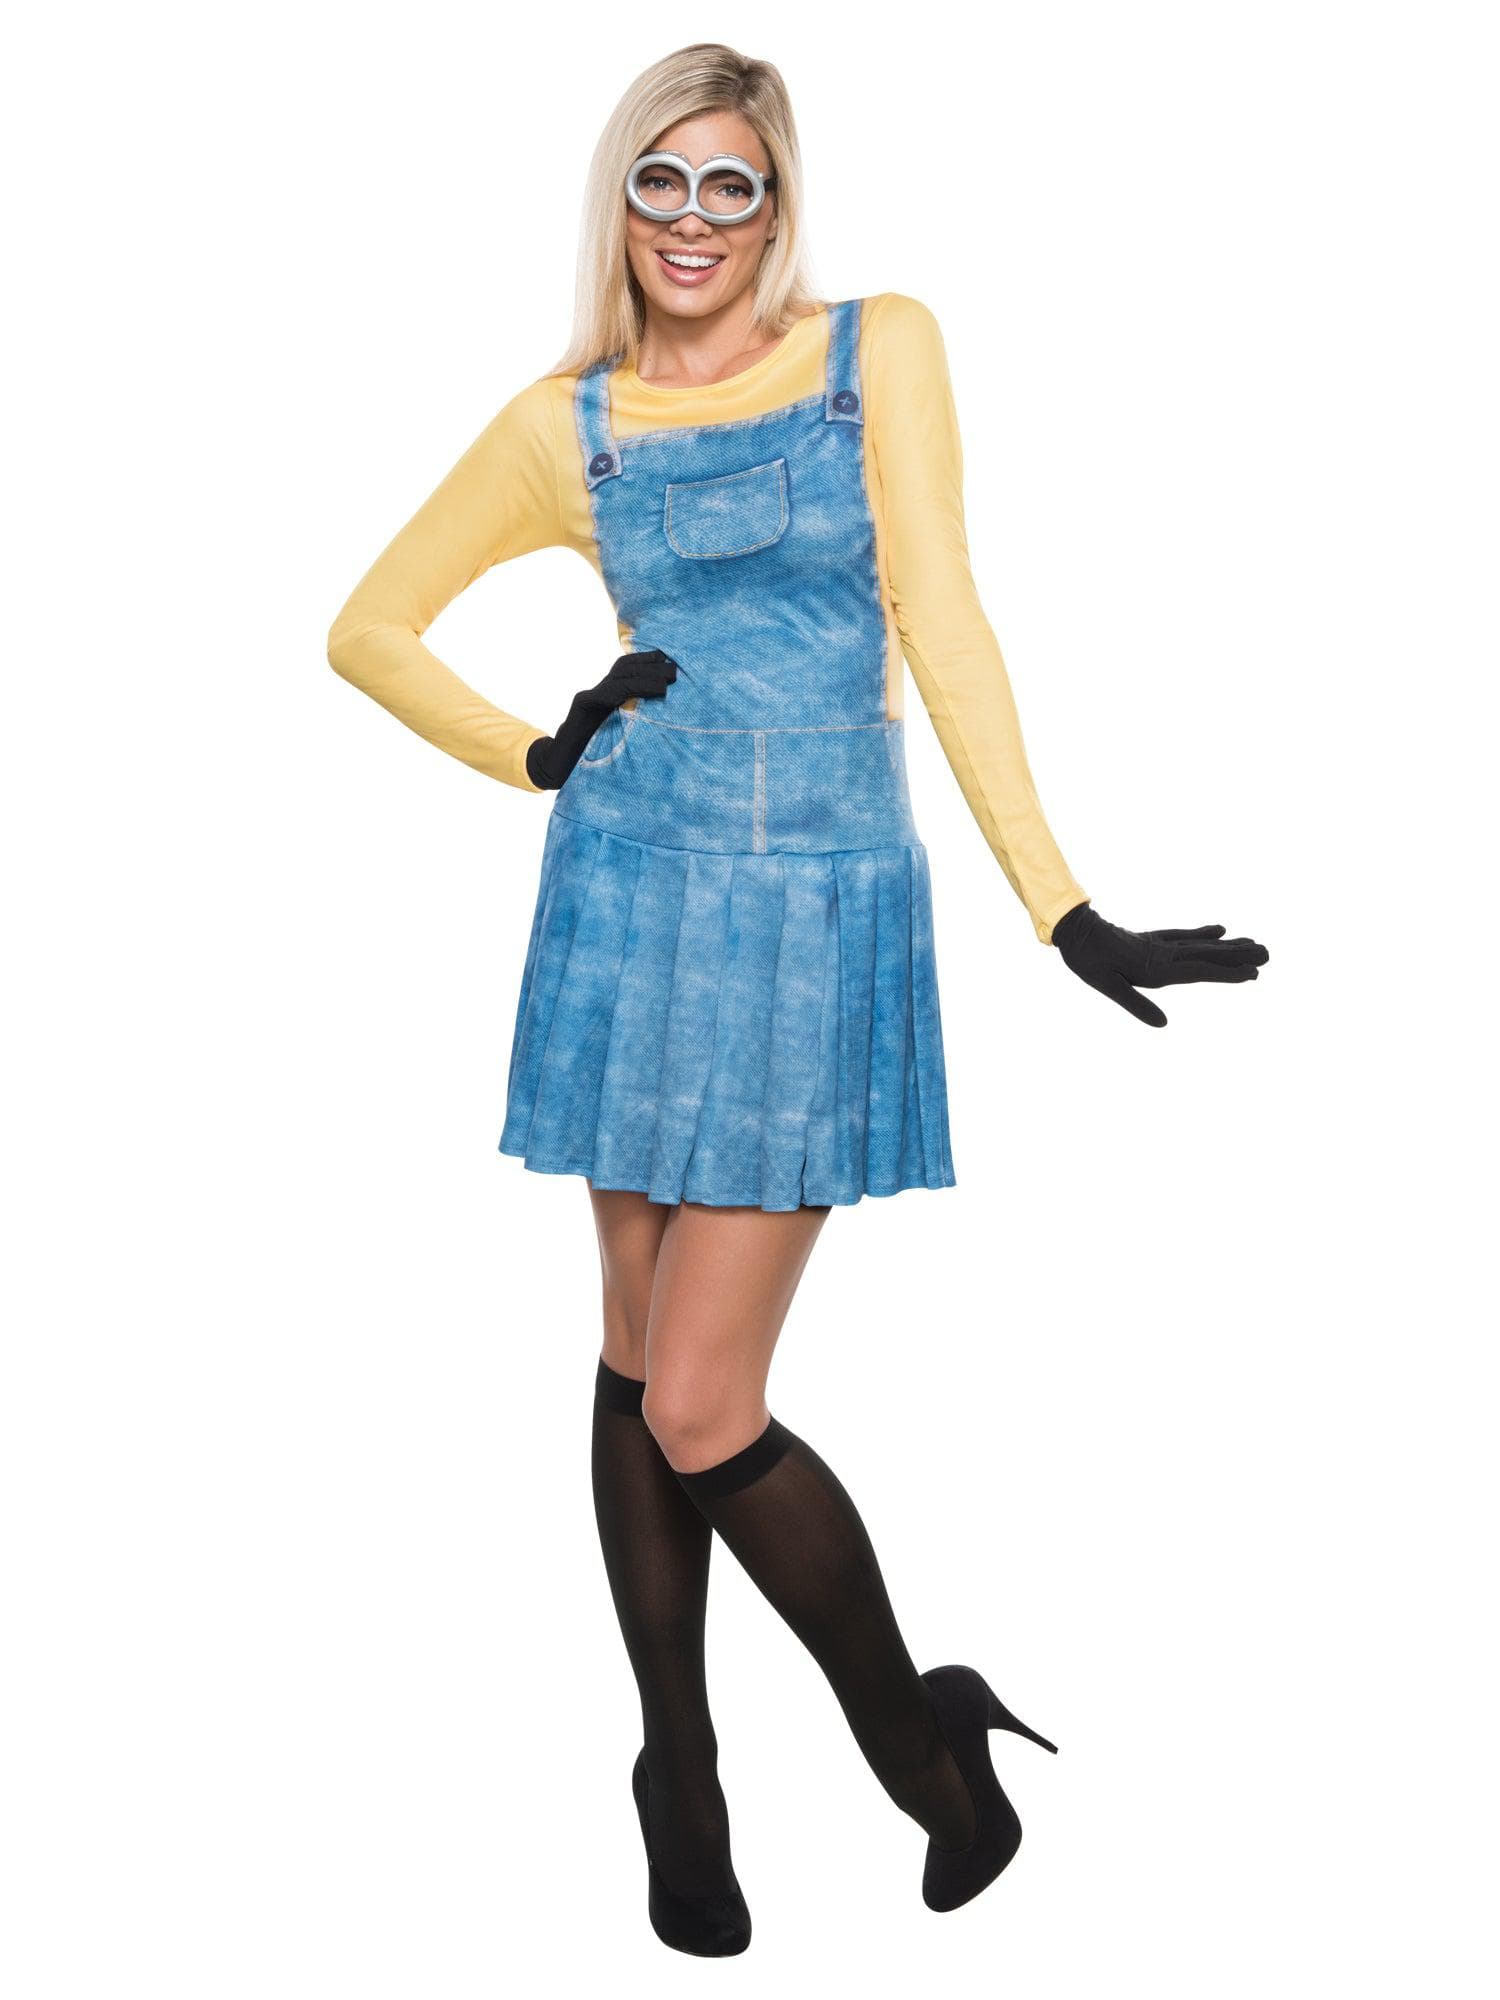 Women's Despicable Me Minion Dress and Accessories - costumes.com